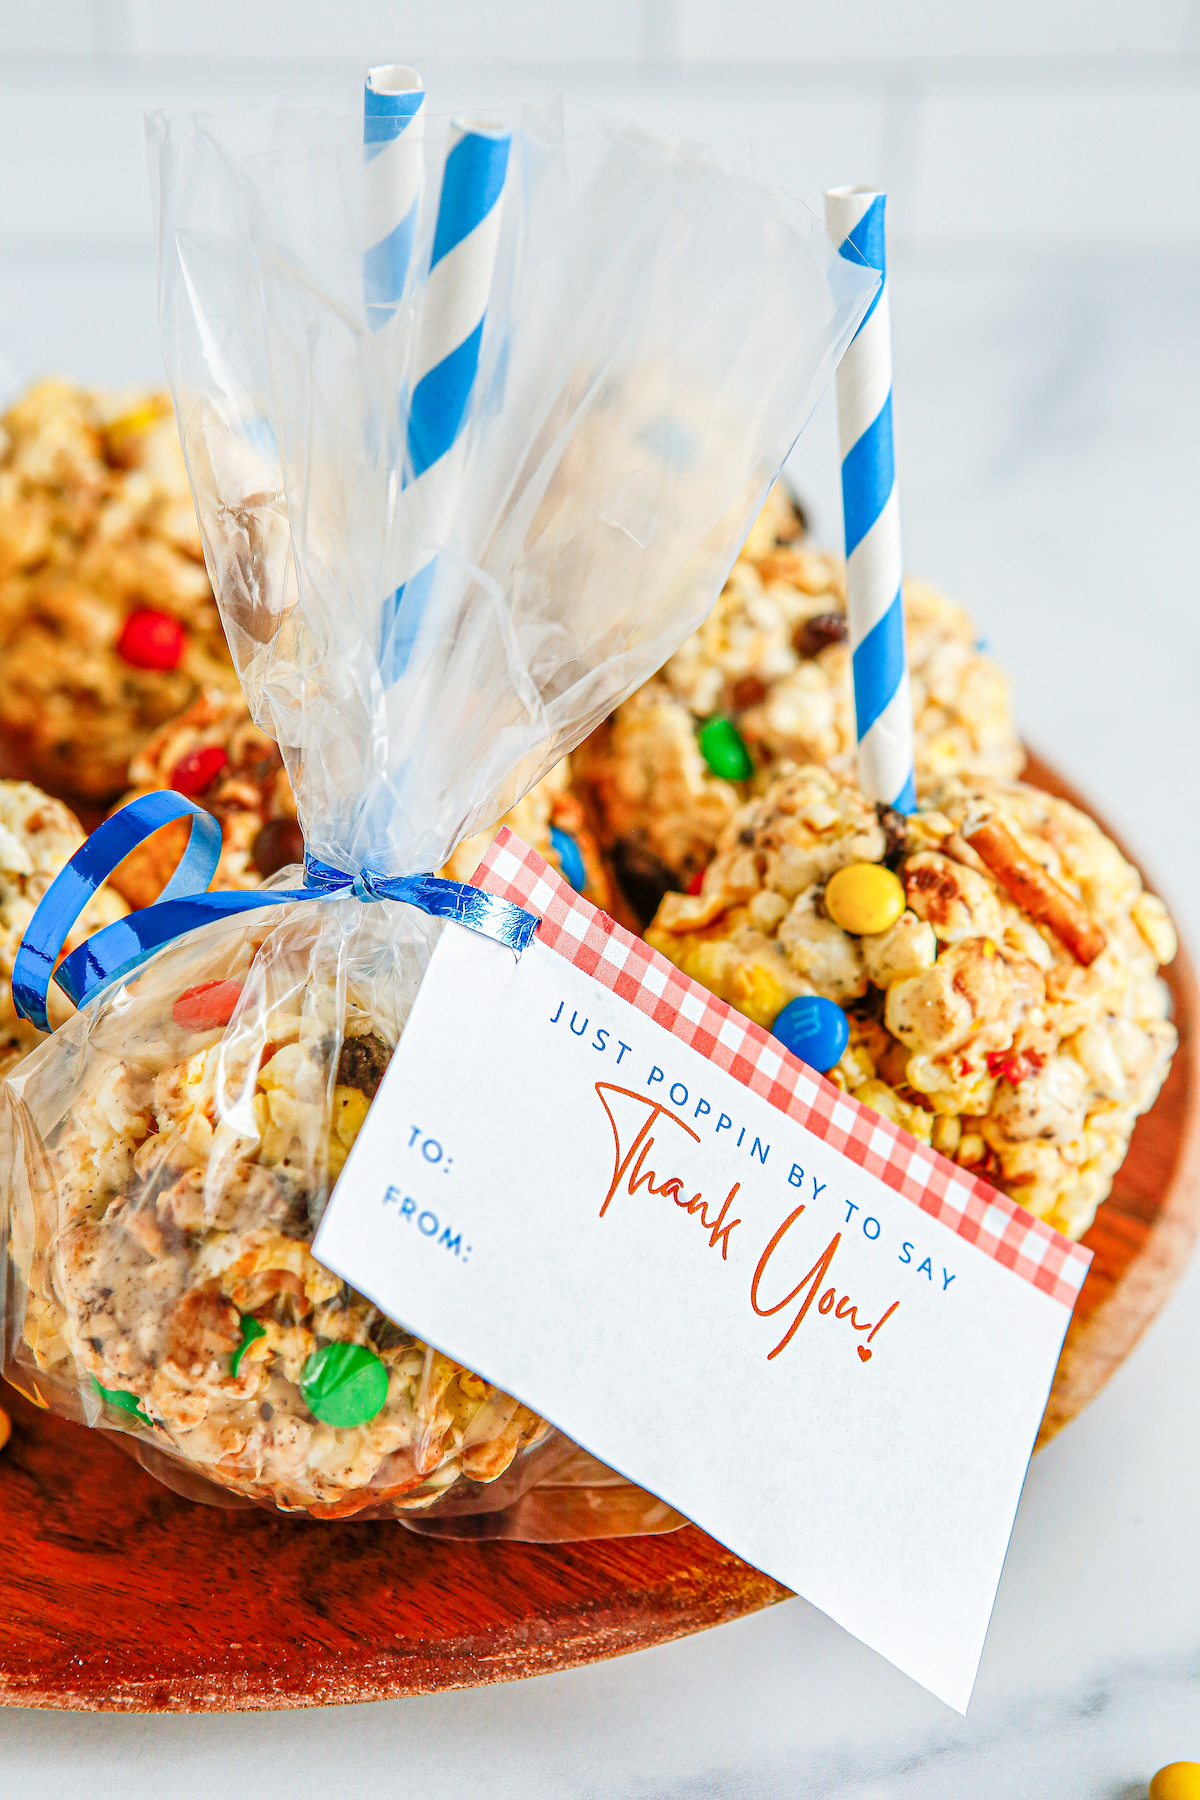 Popcorn treats wrapped in cellophane and tied with ribbons and gift tags.